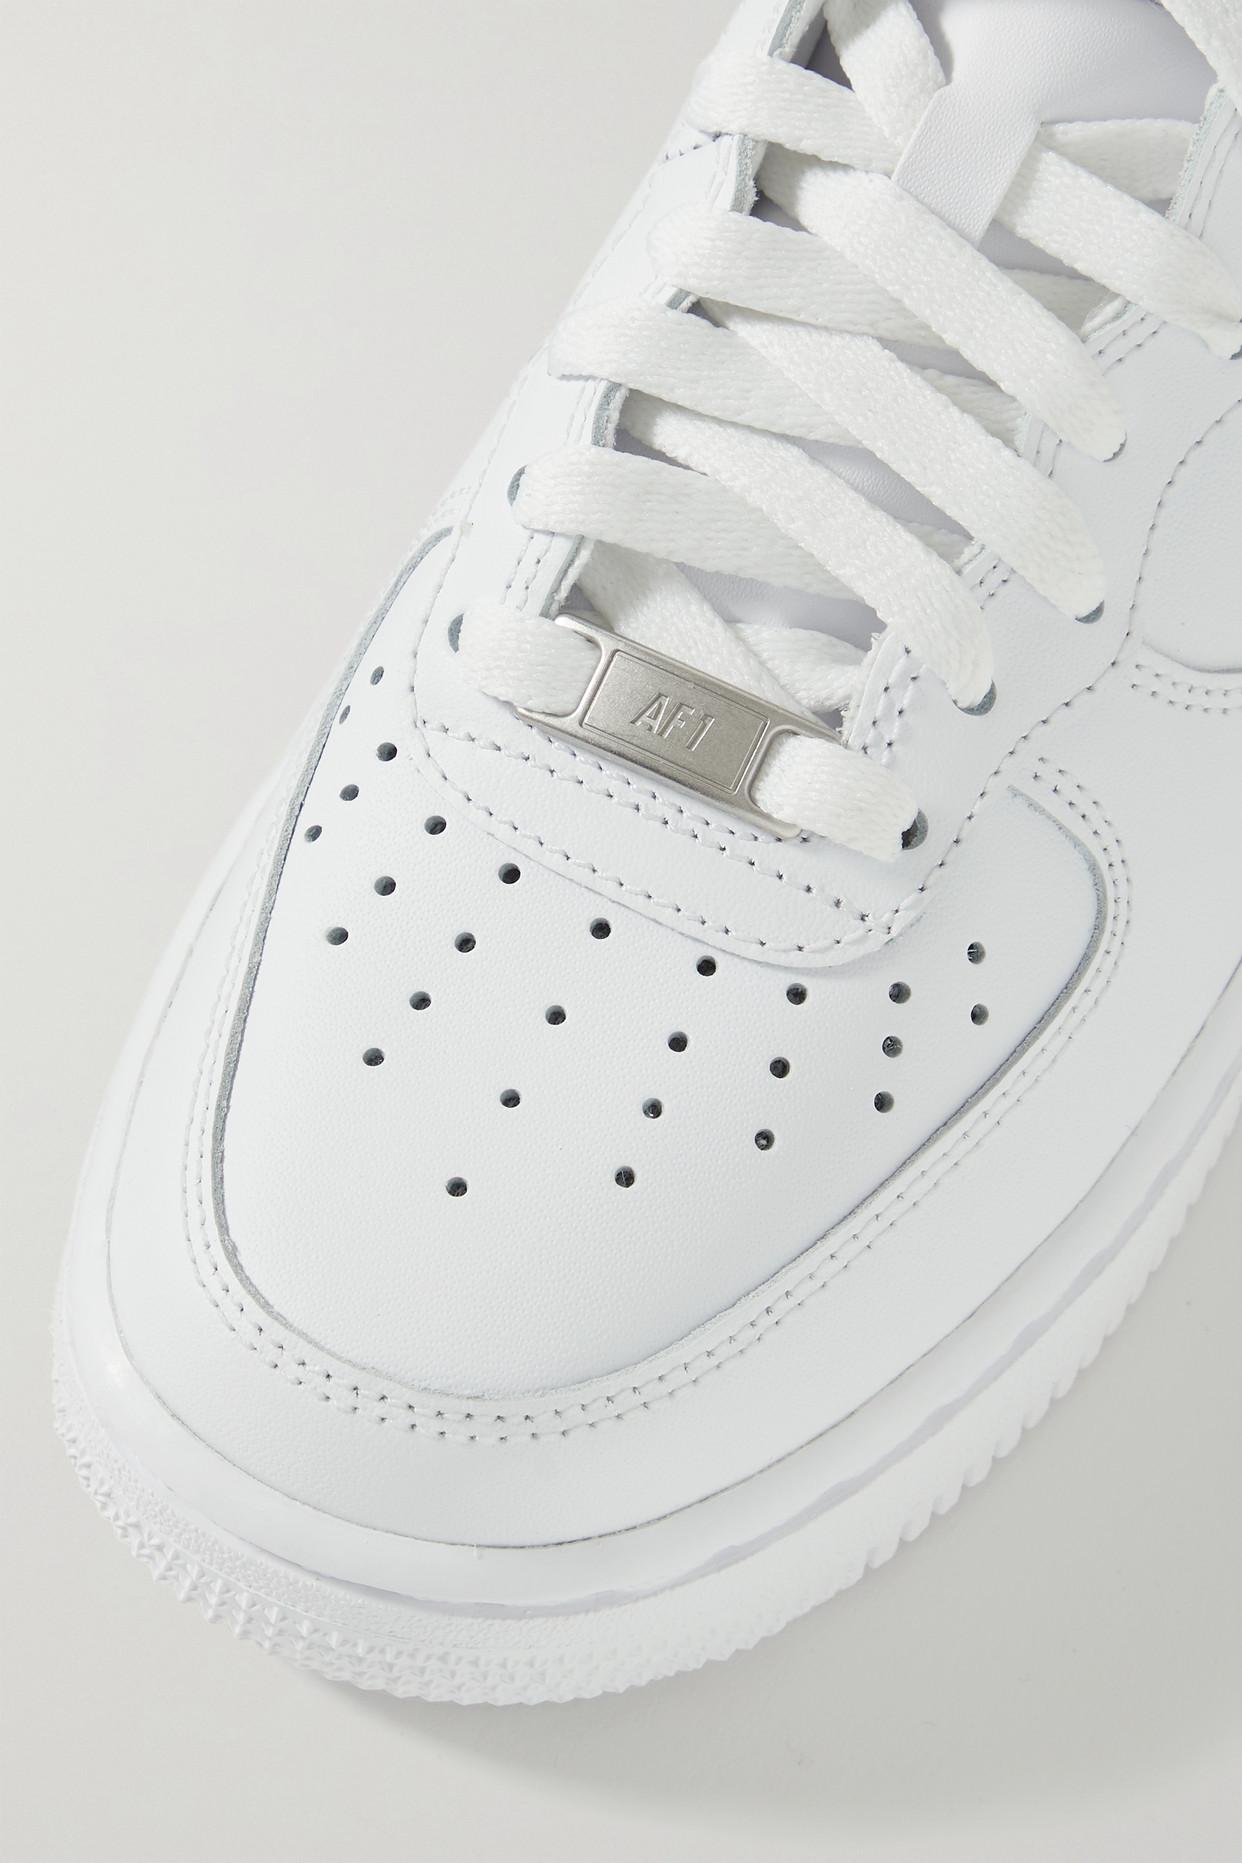 Nike Air Force 1 '07 Leather High-top Sneakers in White | Lyst